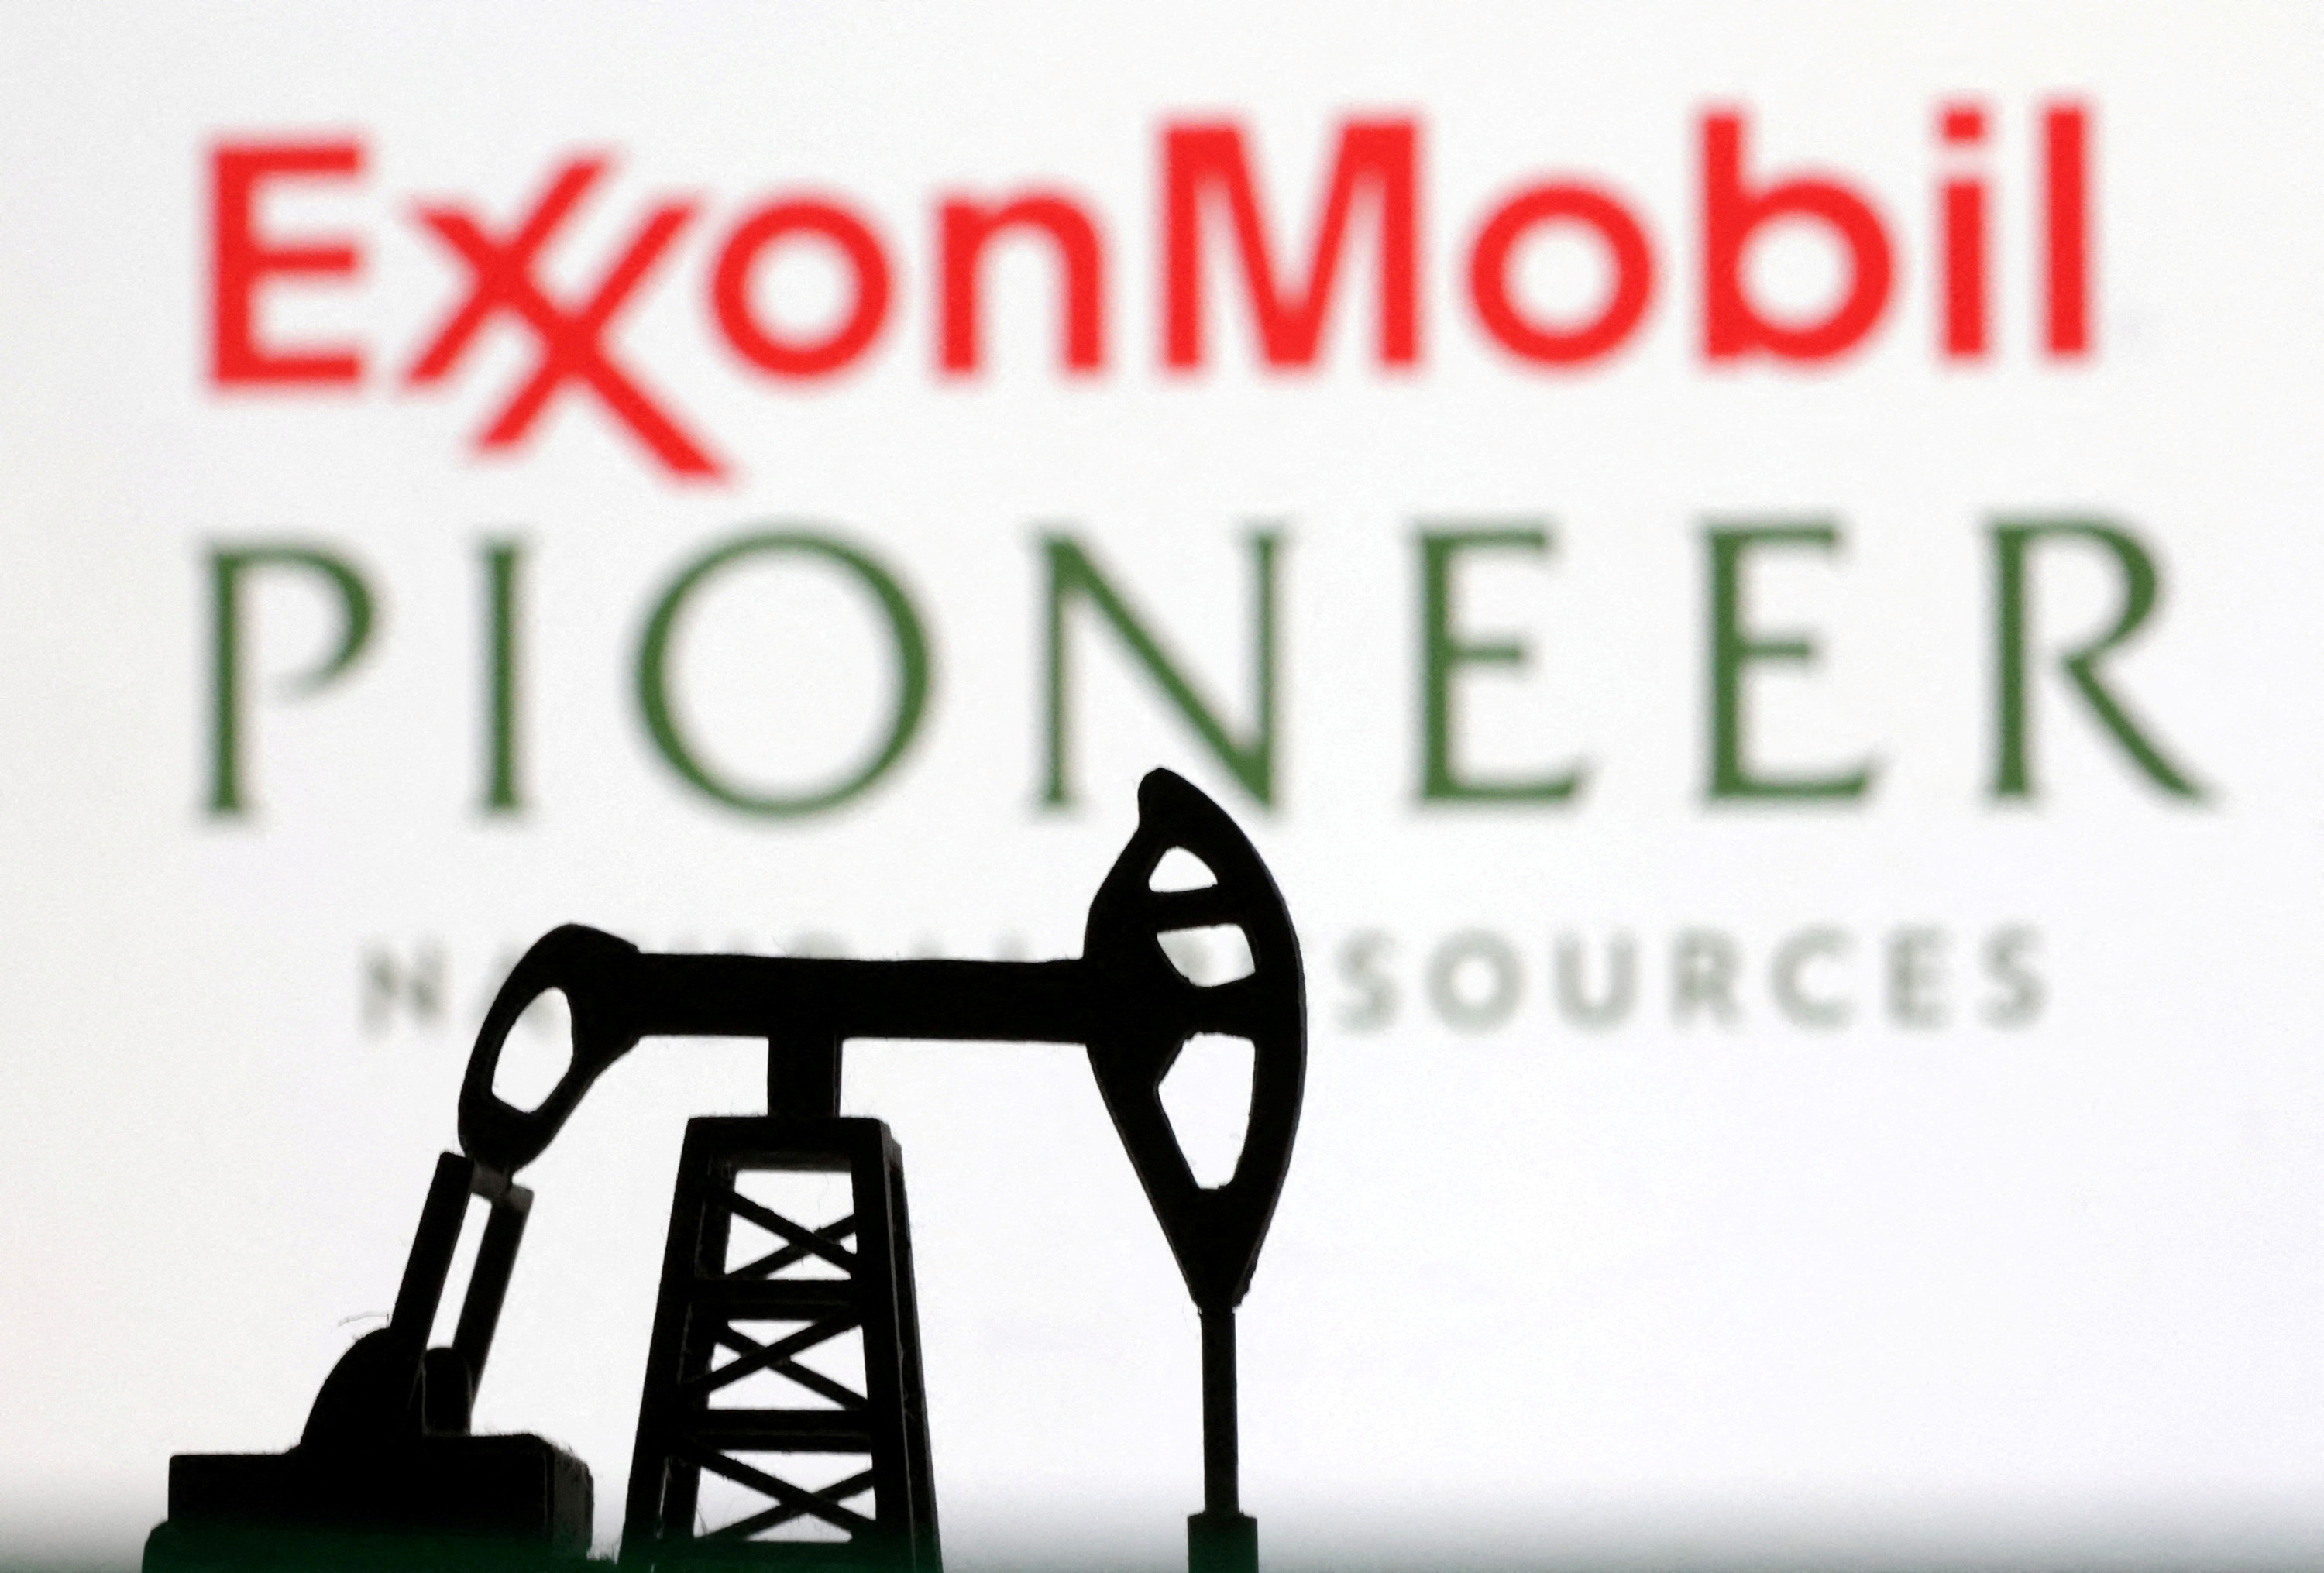 Illustration shows ExxonMobil and Pioneer Natural Resources logos